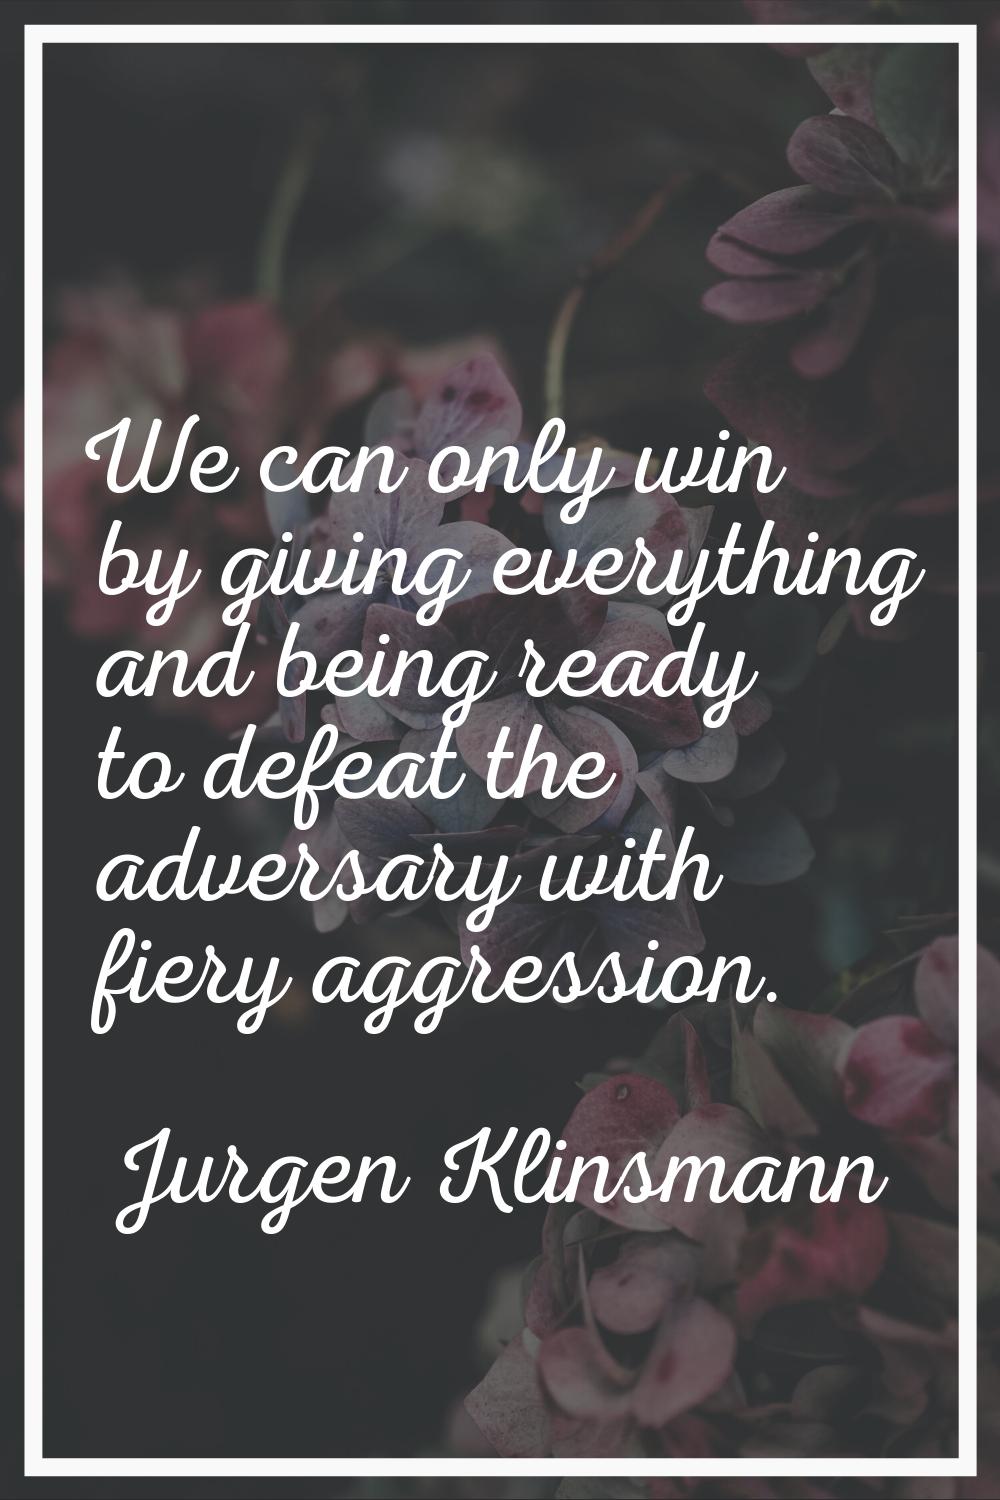 We can only win by giving everything and being ready to defeat the adversary with fiery aggression.